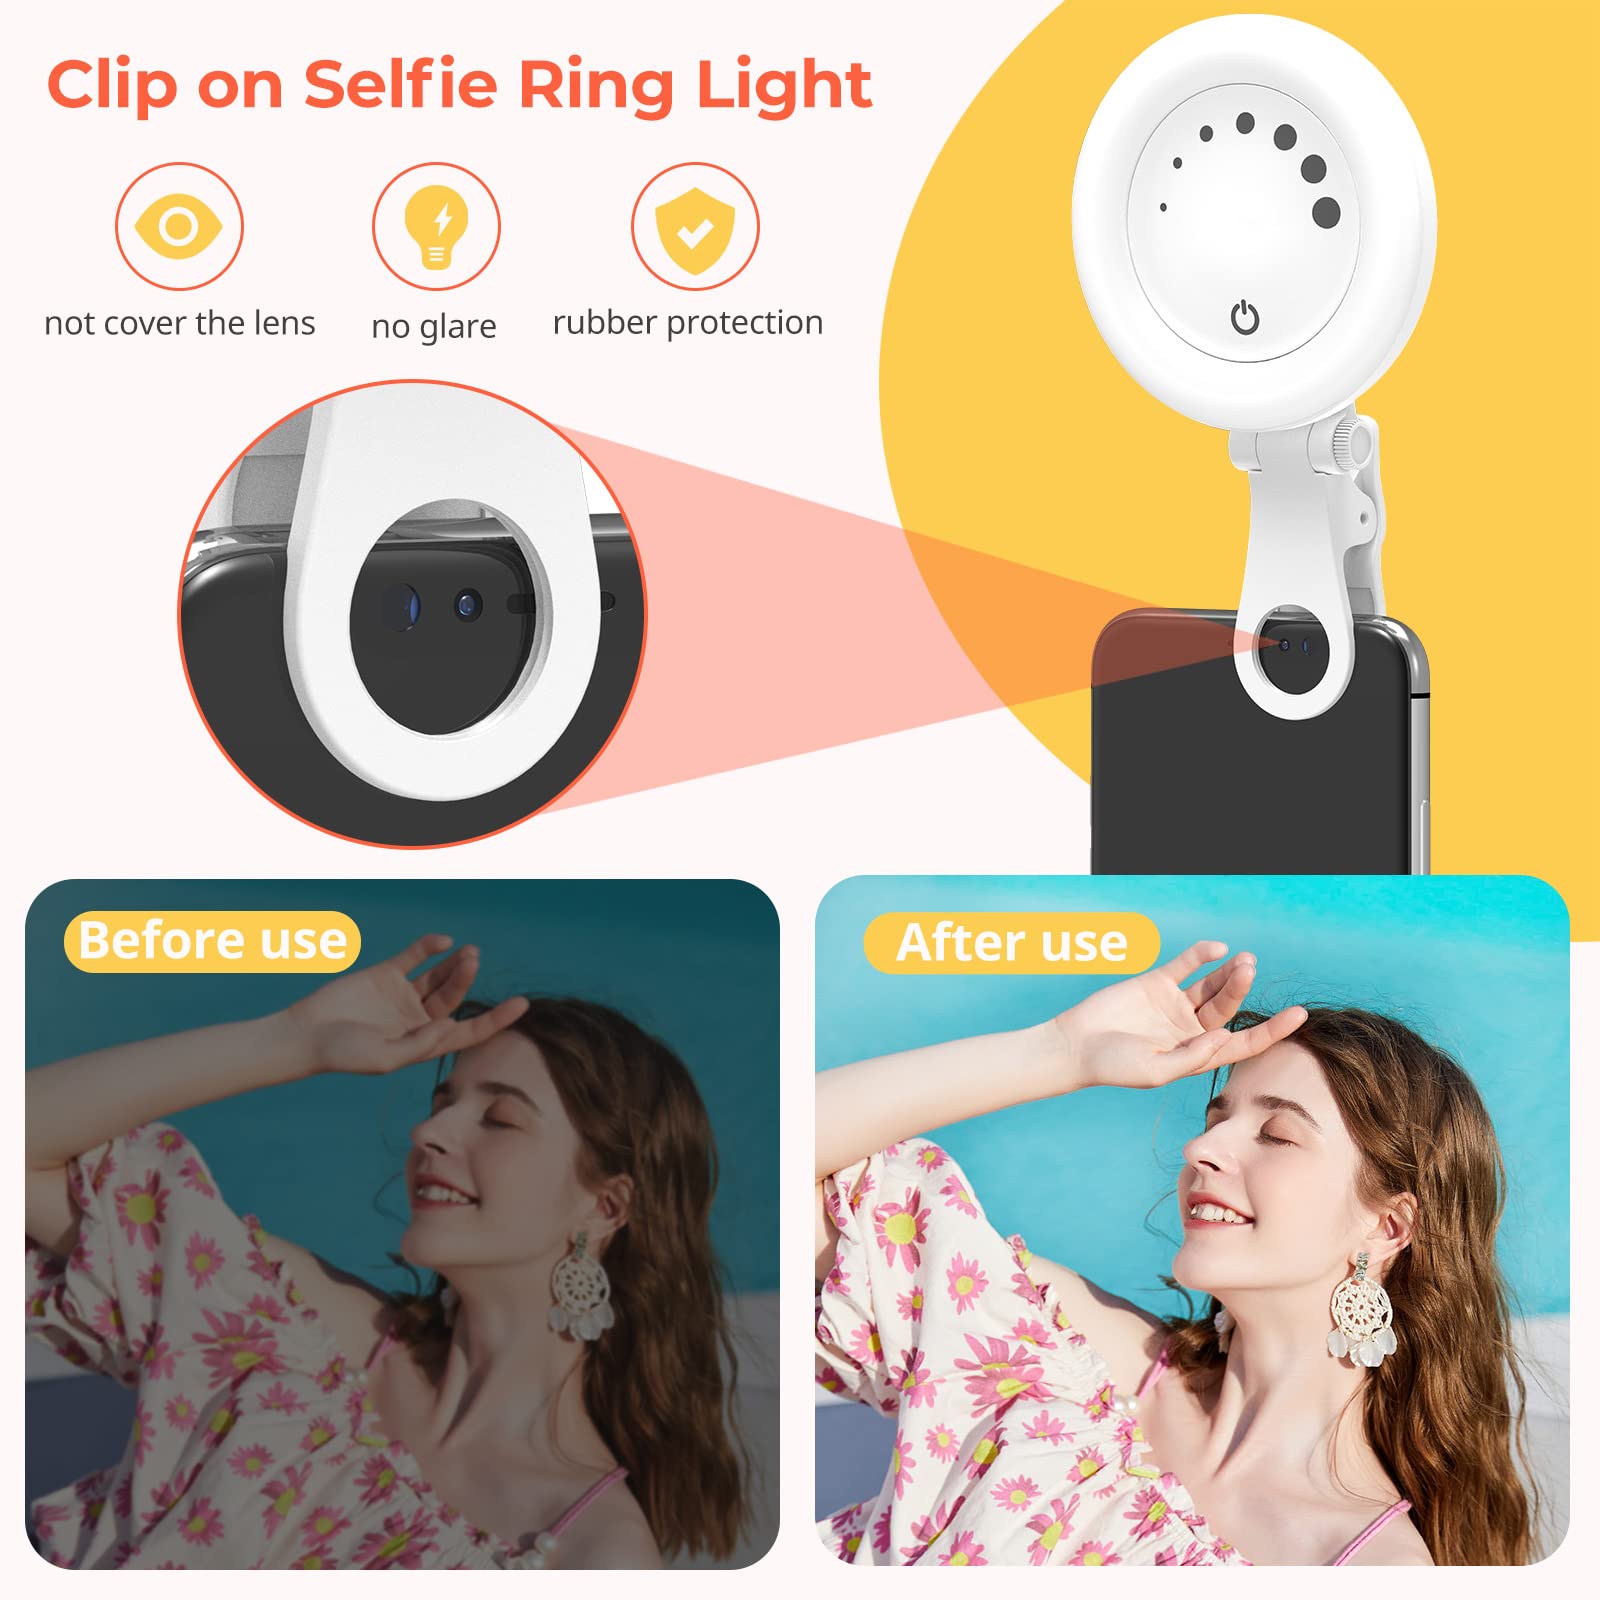 Aureday Ring Light for Phone - Selfie Light with Clip, LED Ring Light for iPhone, Portable Phone Light for Selfies, Video Recording, Makeup, Compatible with Cell Phone, Laptop, Tablet